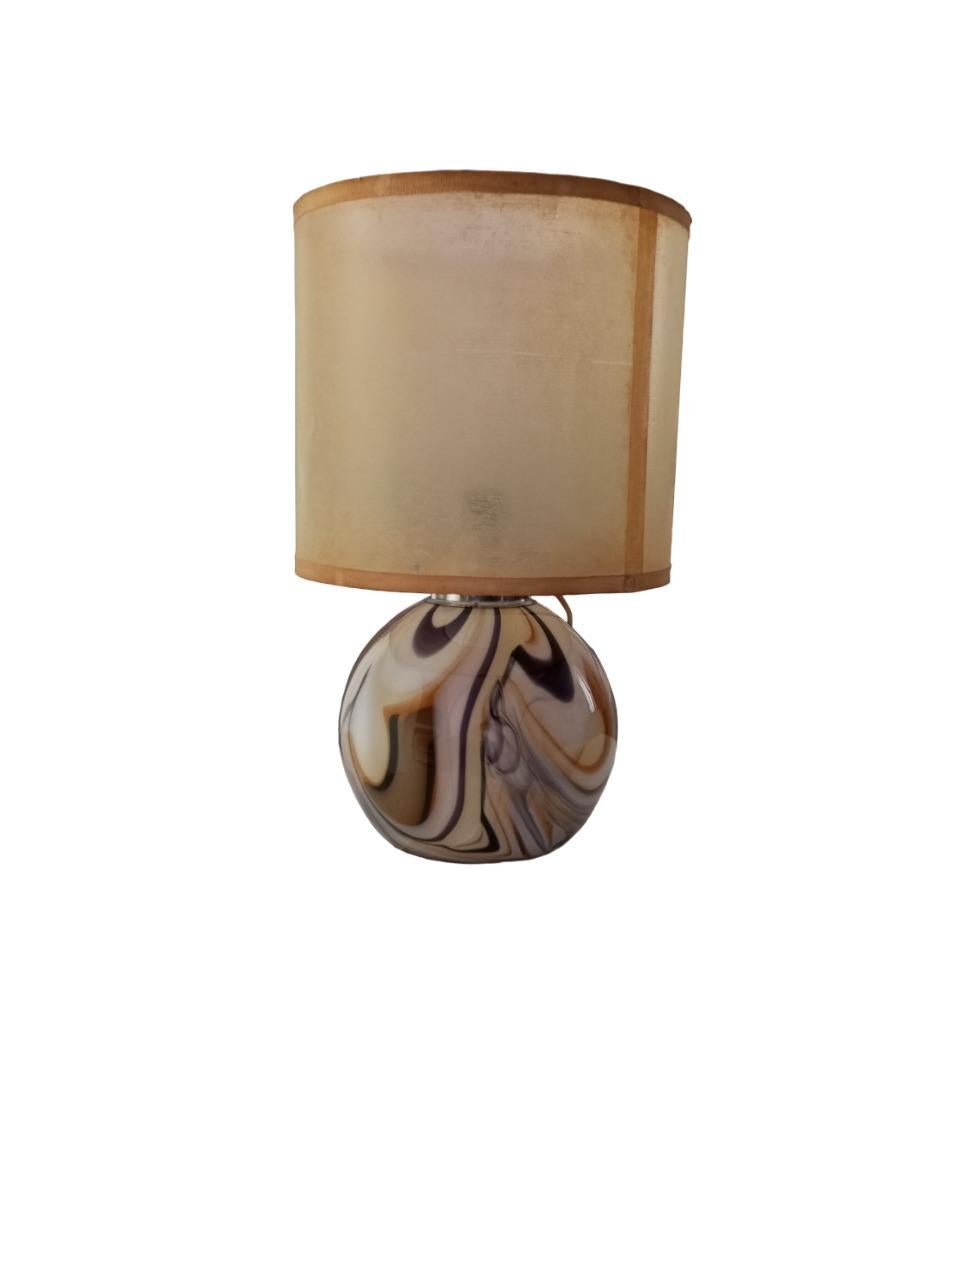 Murano Glass Murano glass table lamp from the '70s. For Sale